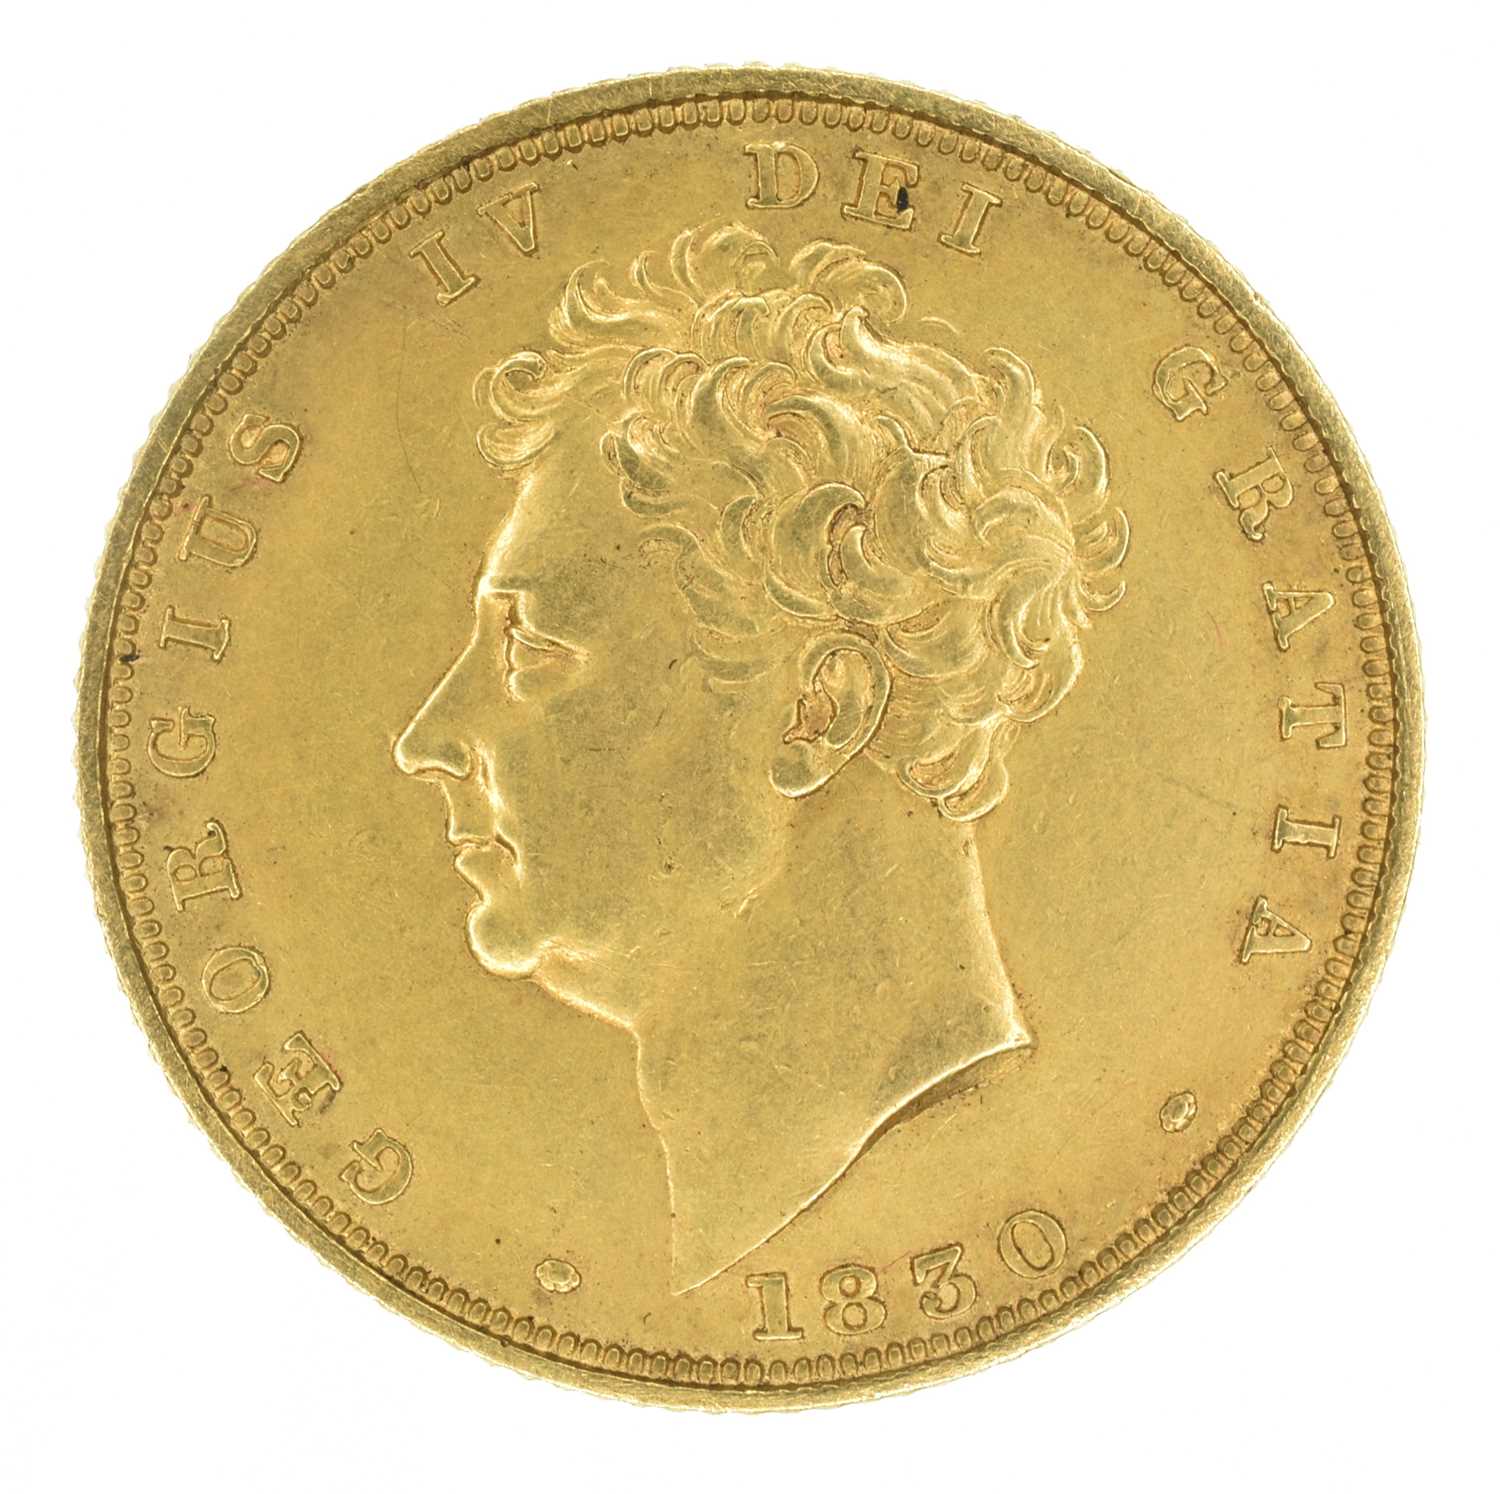 Lot 108 - King George IV, Sovereign, 1830.